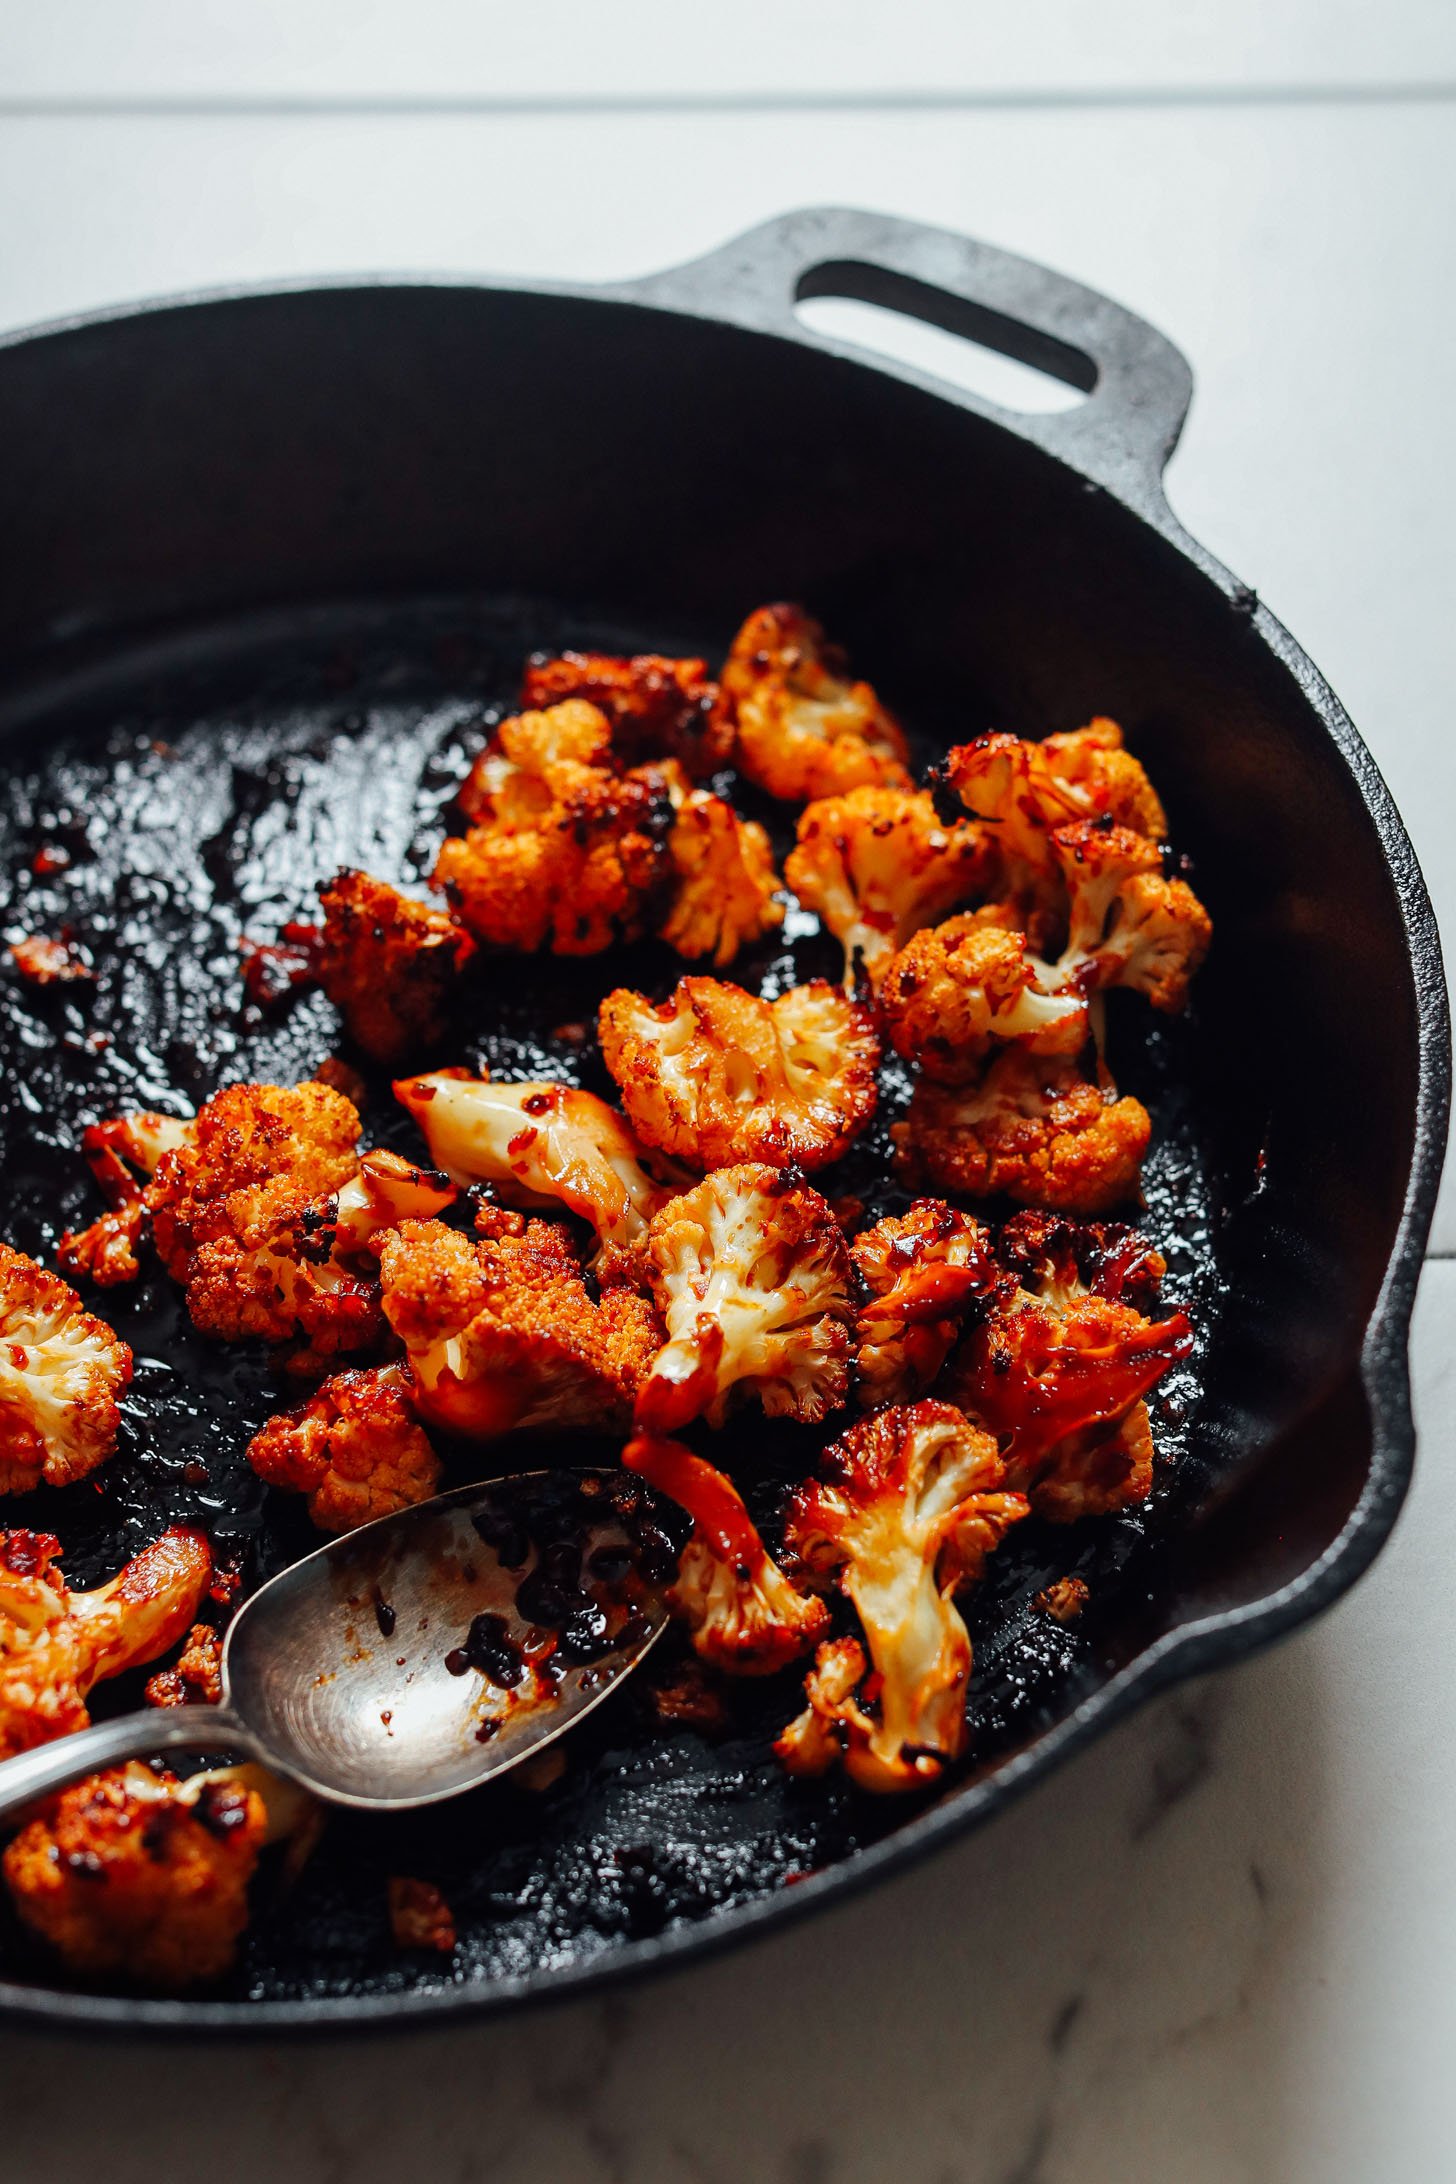 Cooking cauliflower in a cast-iron skillet for delicious gluten-free vegan sandwiches